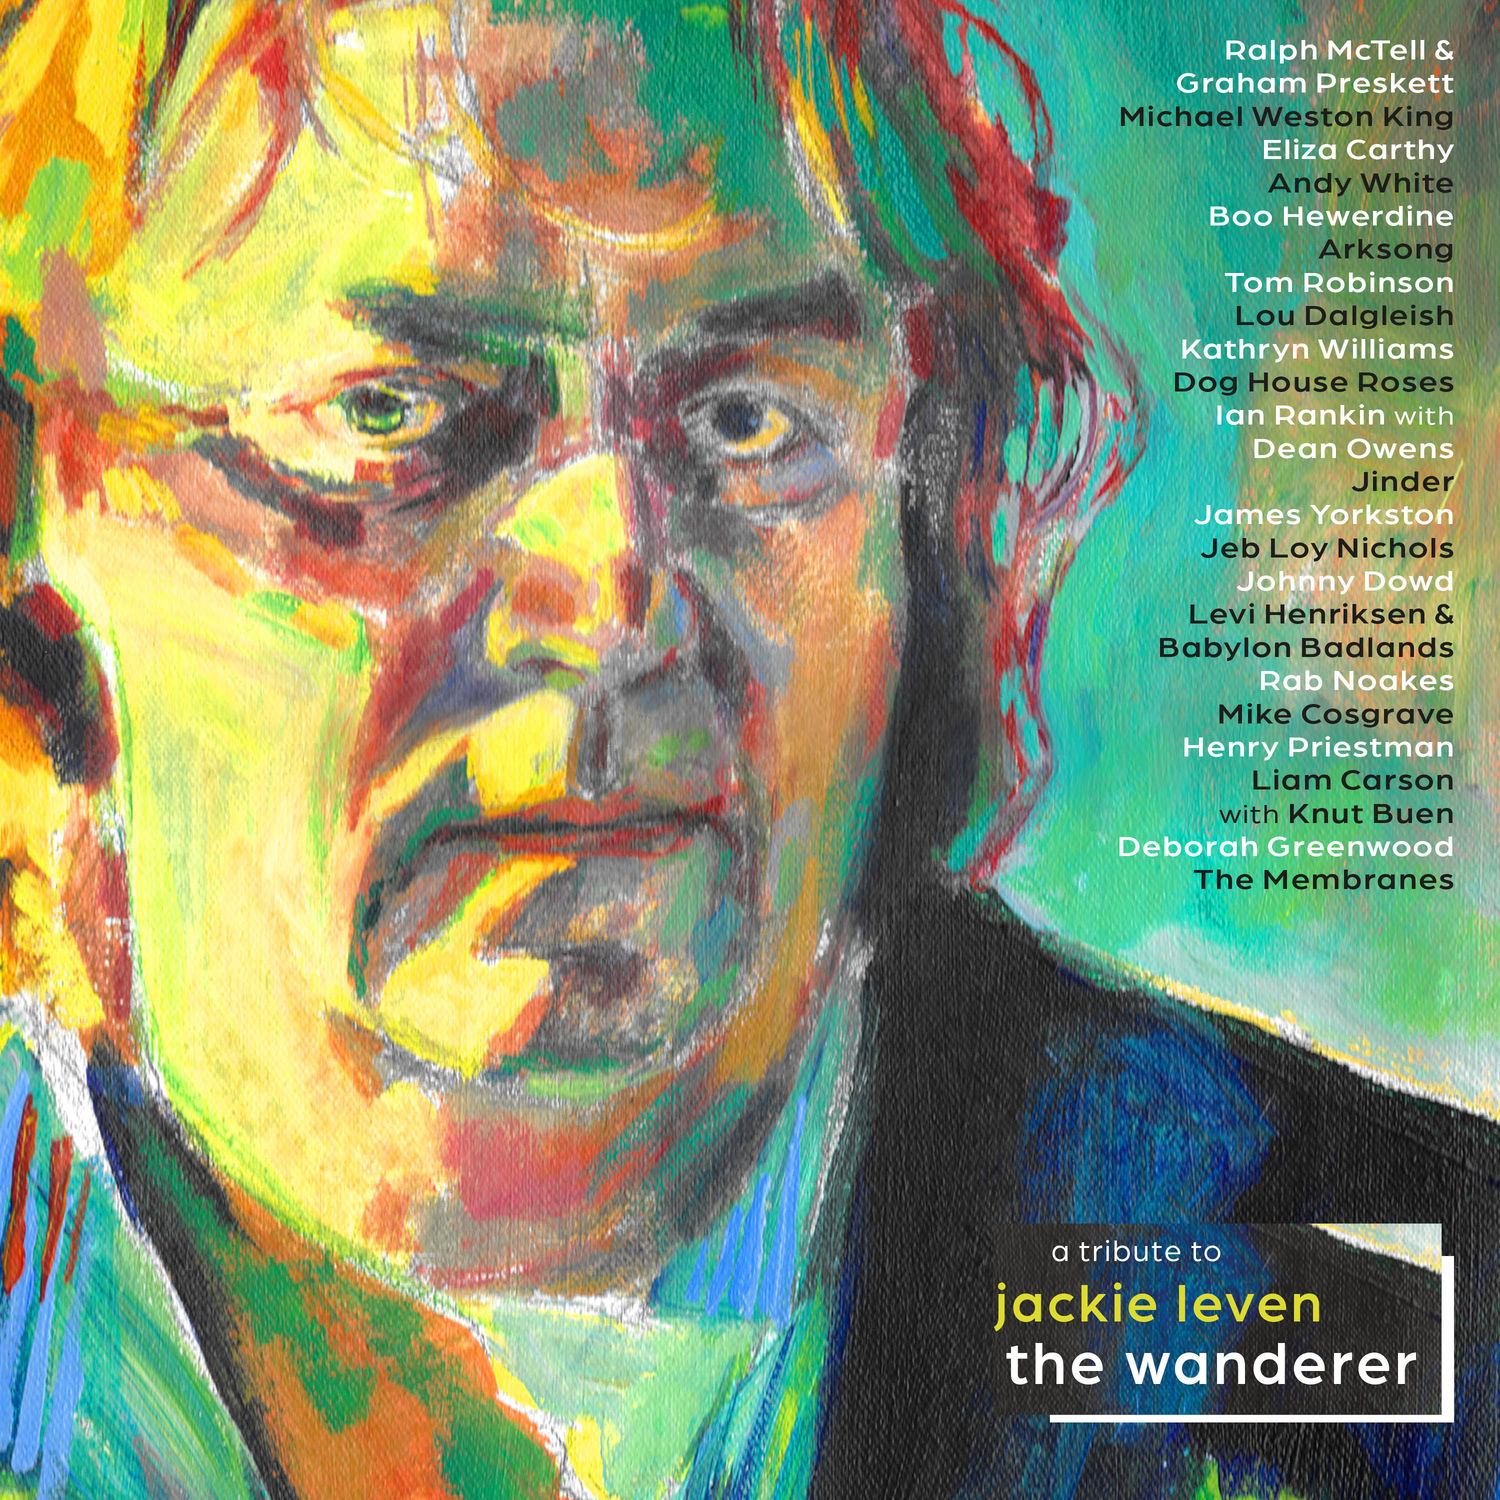 Various Artists - 2021 - The Wanderer - A Tribute to Jackie Leven (24-44.1)